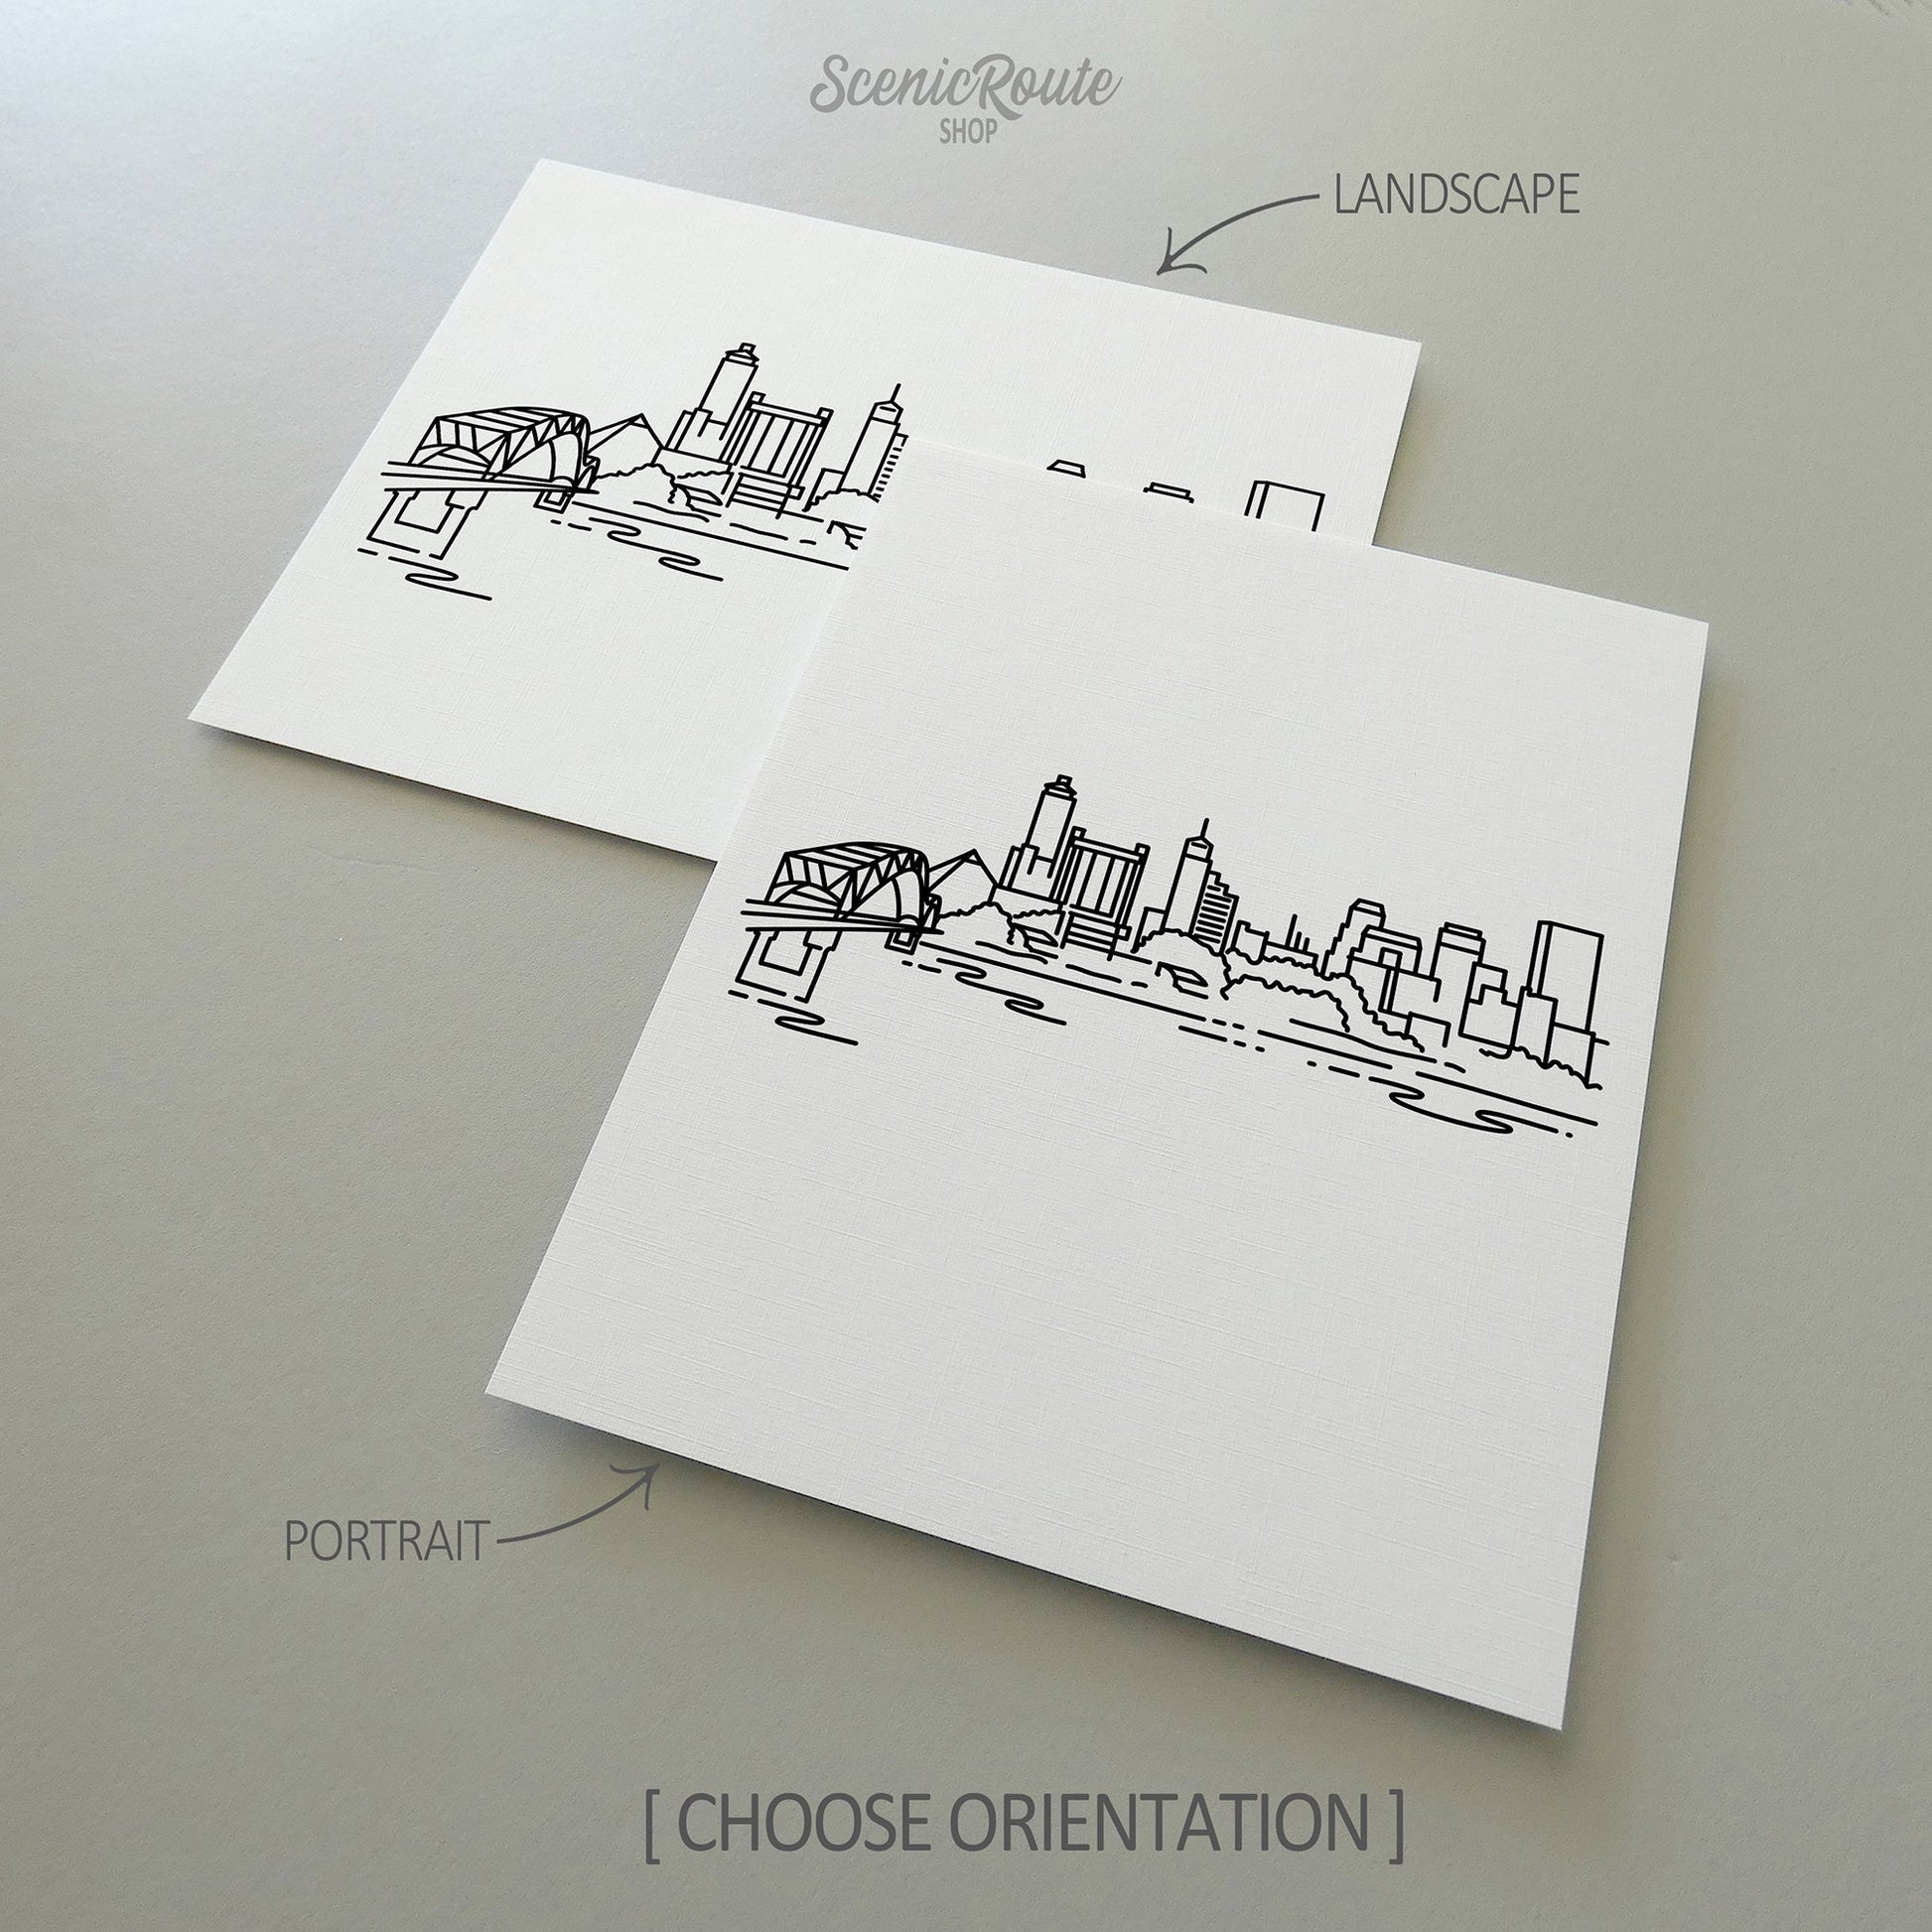 Two line art drawings of the Memphis Skyline on white linen paper with a gray background.  The pieces are shown in portrait and landscape orientation for the available art print options.